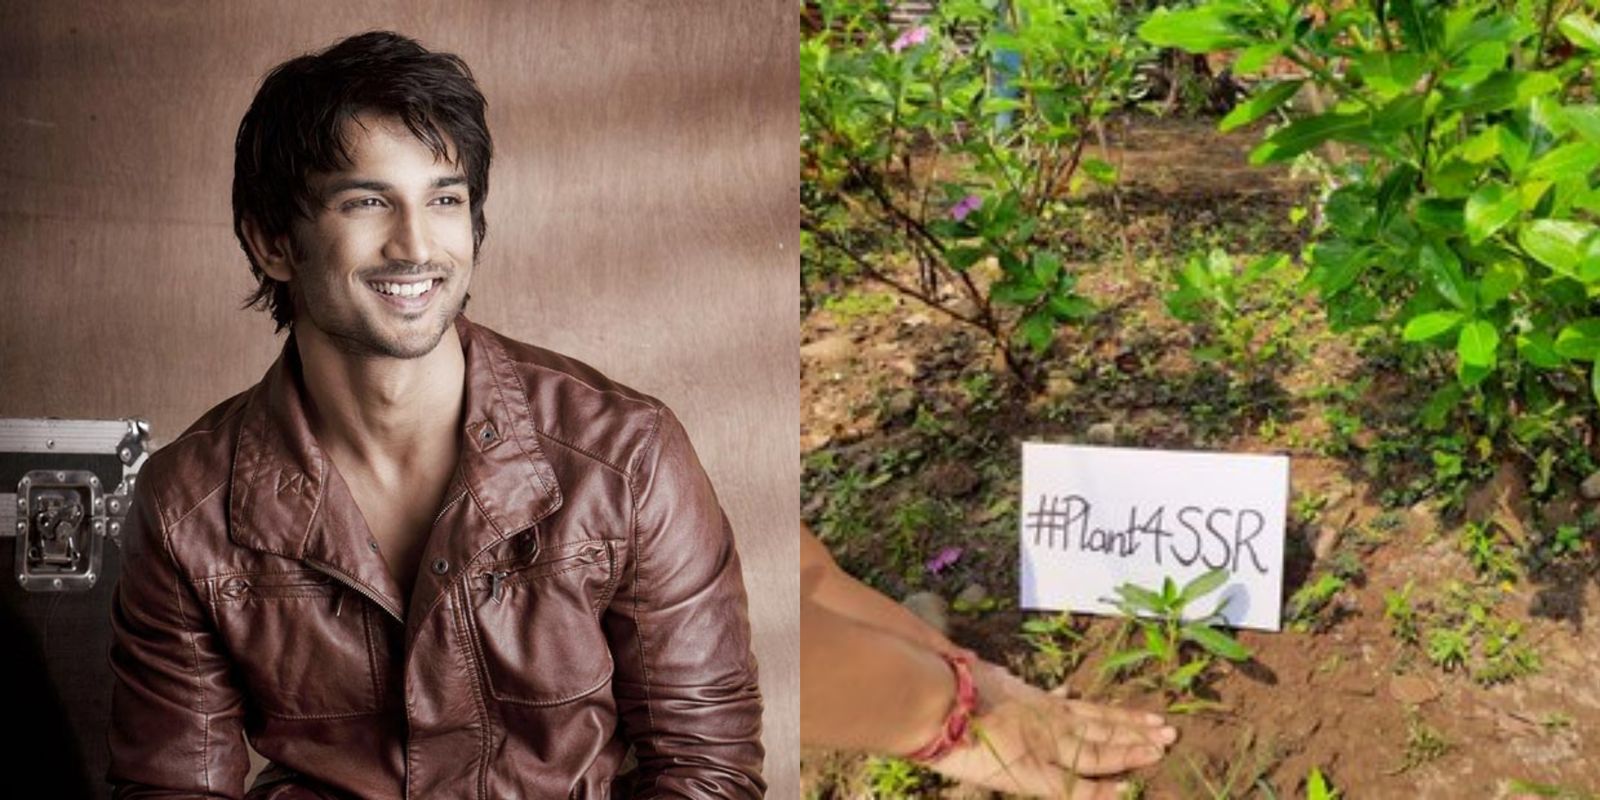 #Plants4SSR: Sushant’s Sister Shweta Reveals Over 1 Lakh Trees Were Planted In The Late Actor’s Memory